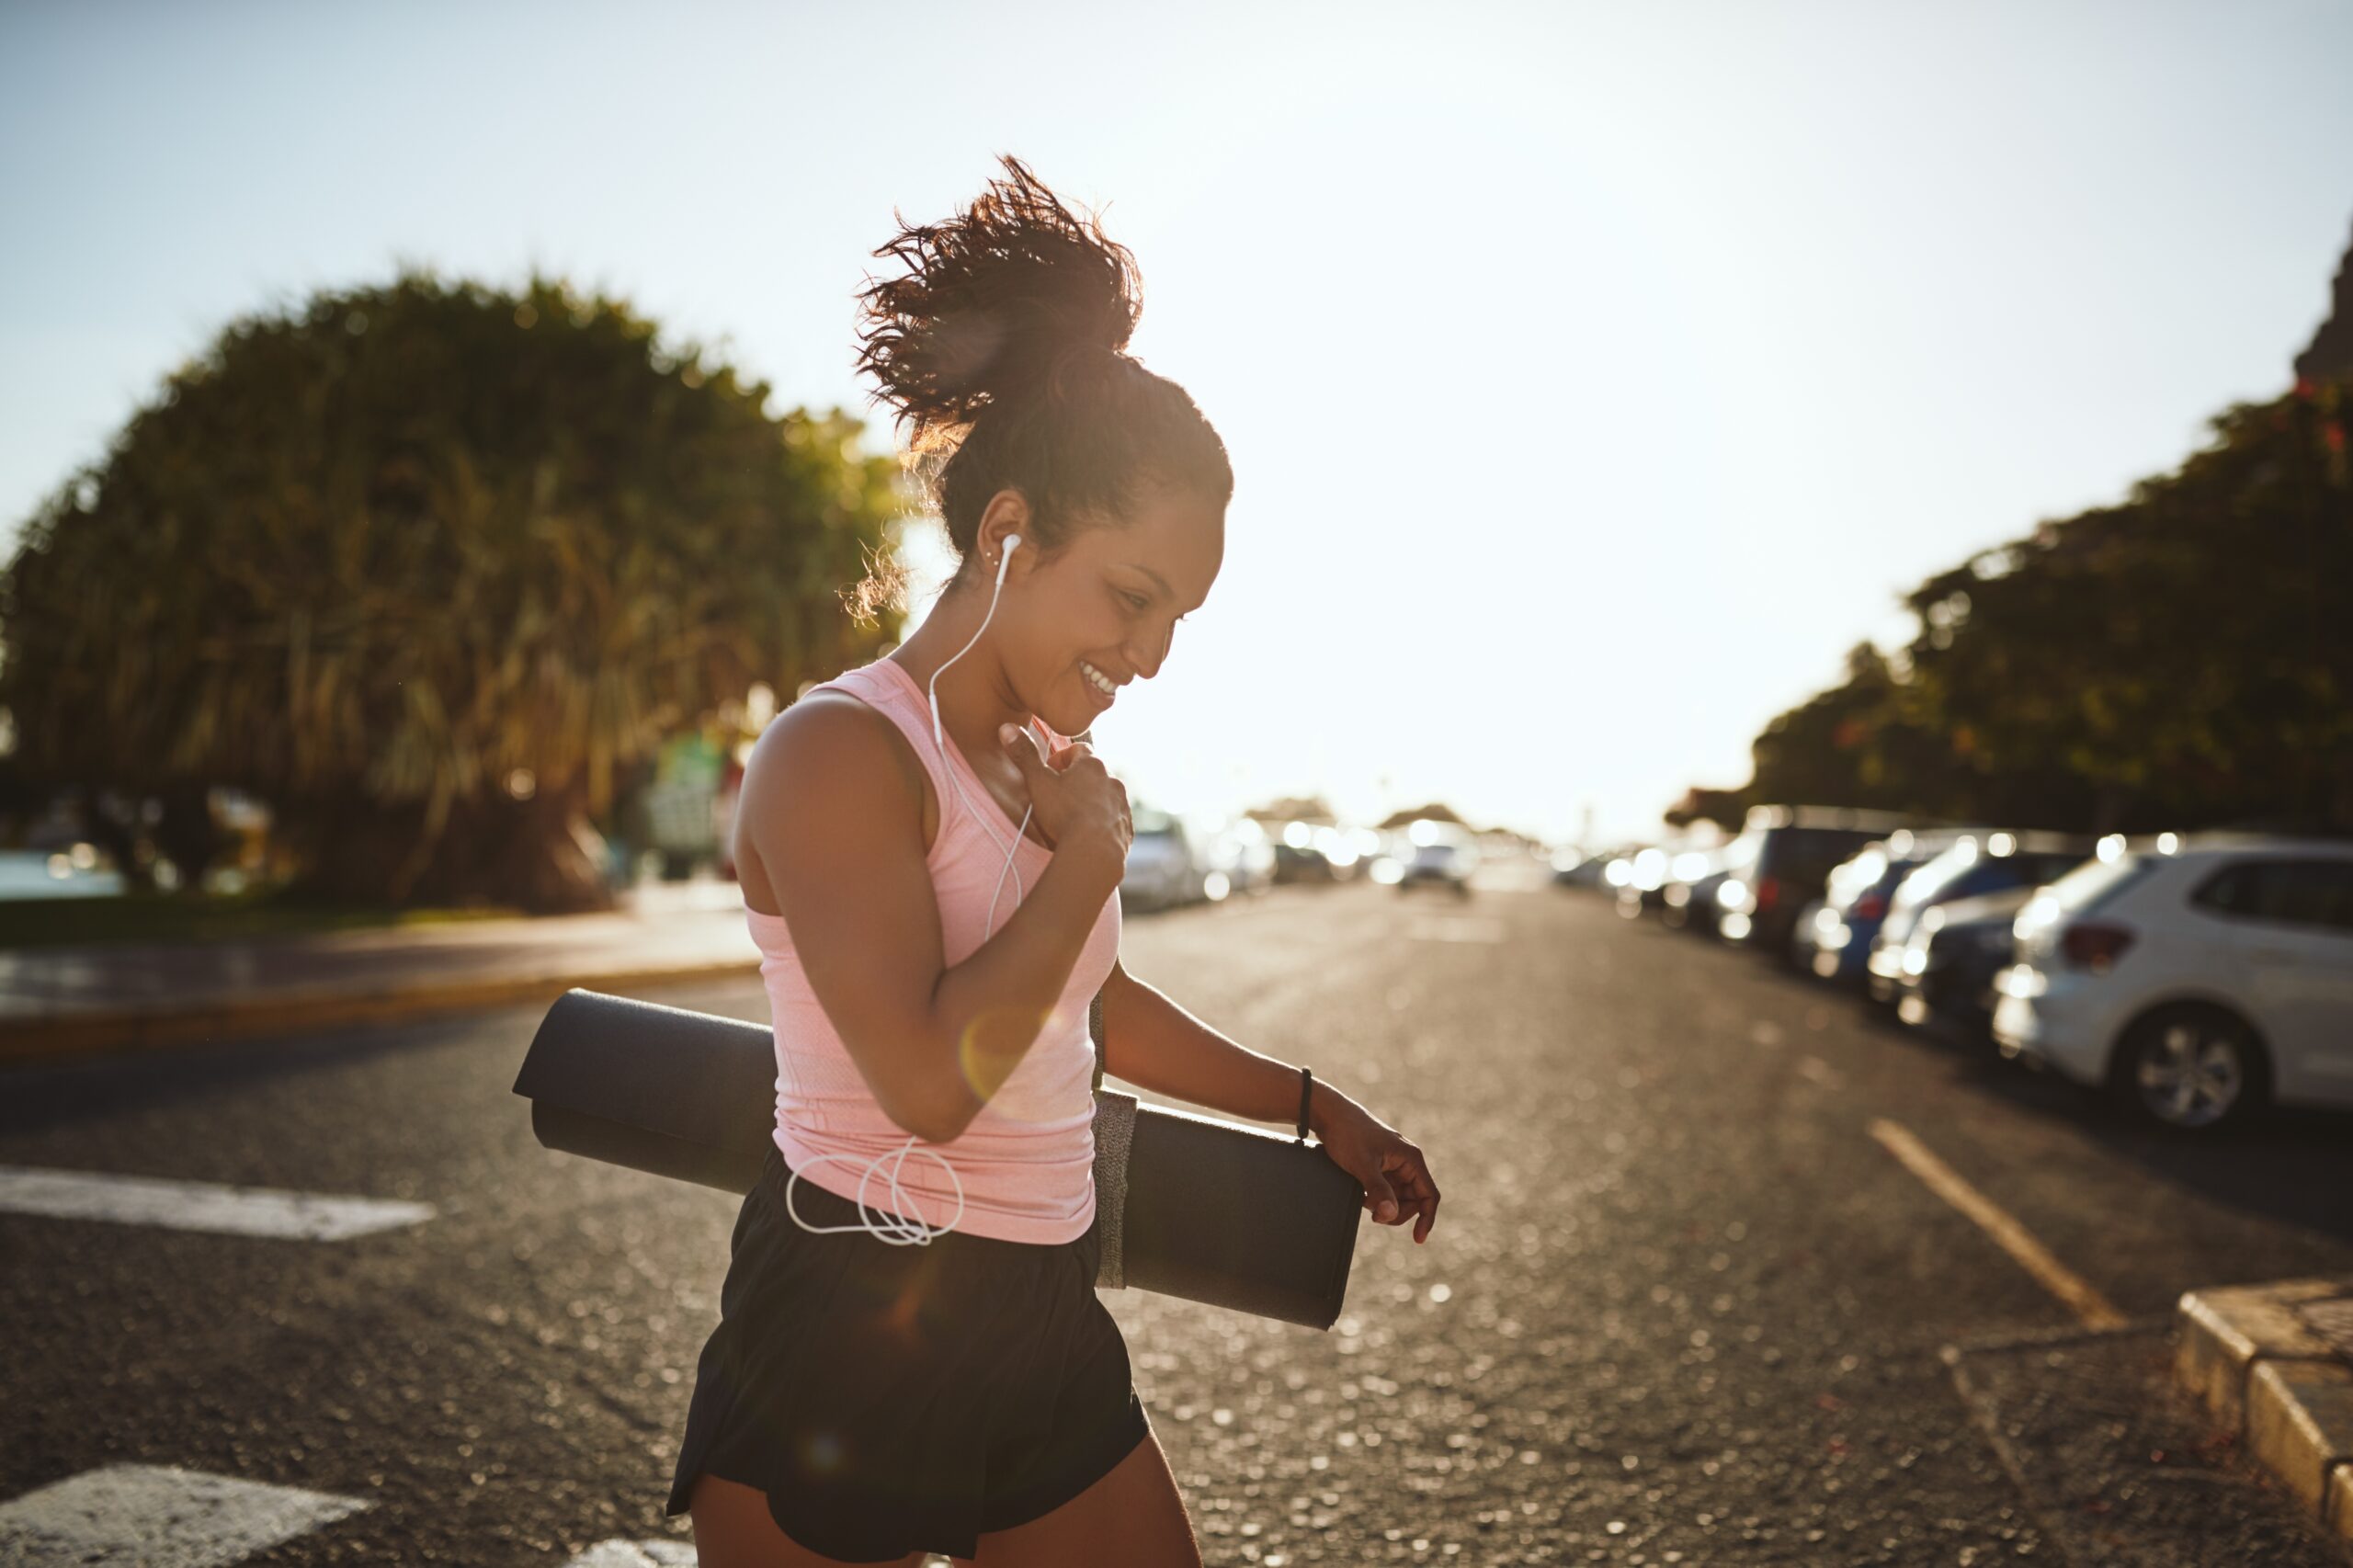 Smiling young woman working out.